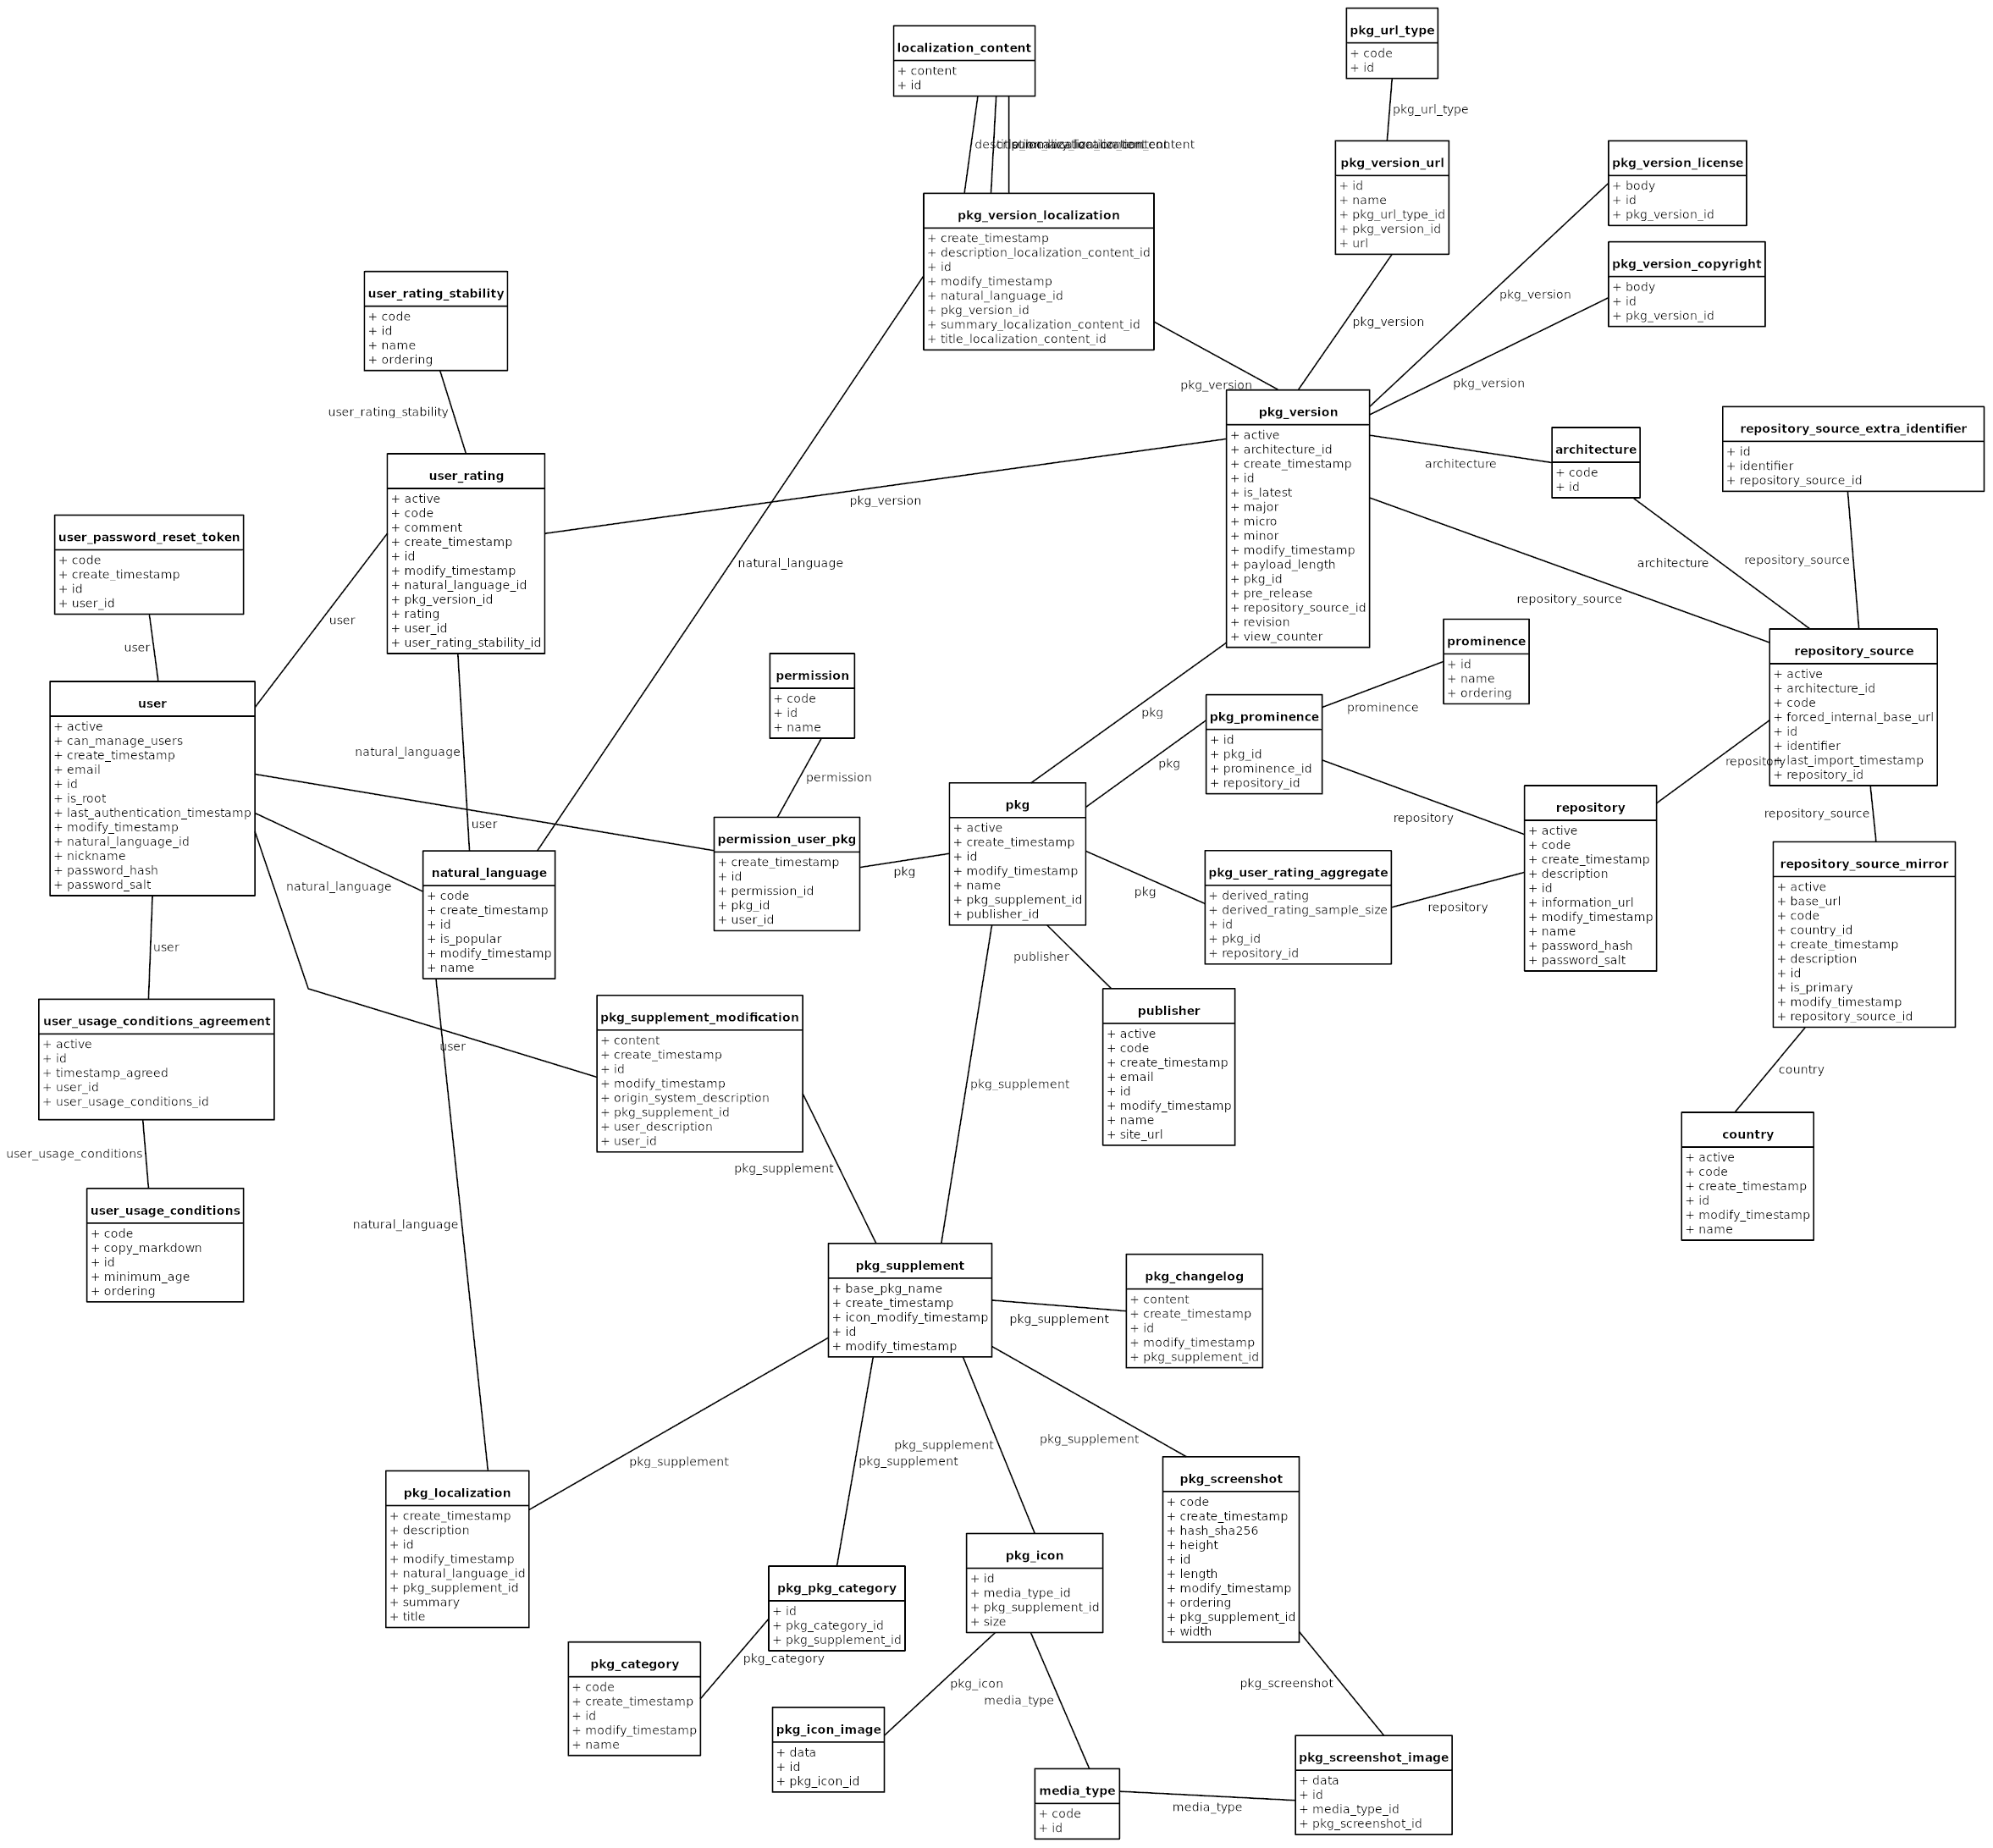 The persisted data model for the application server.